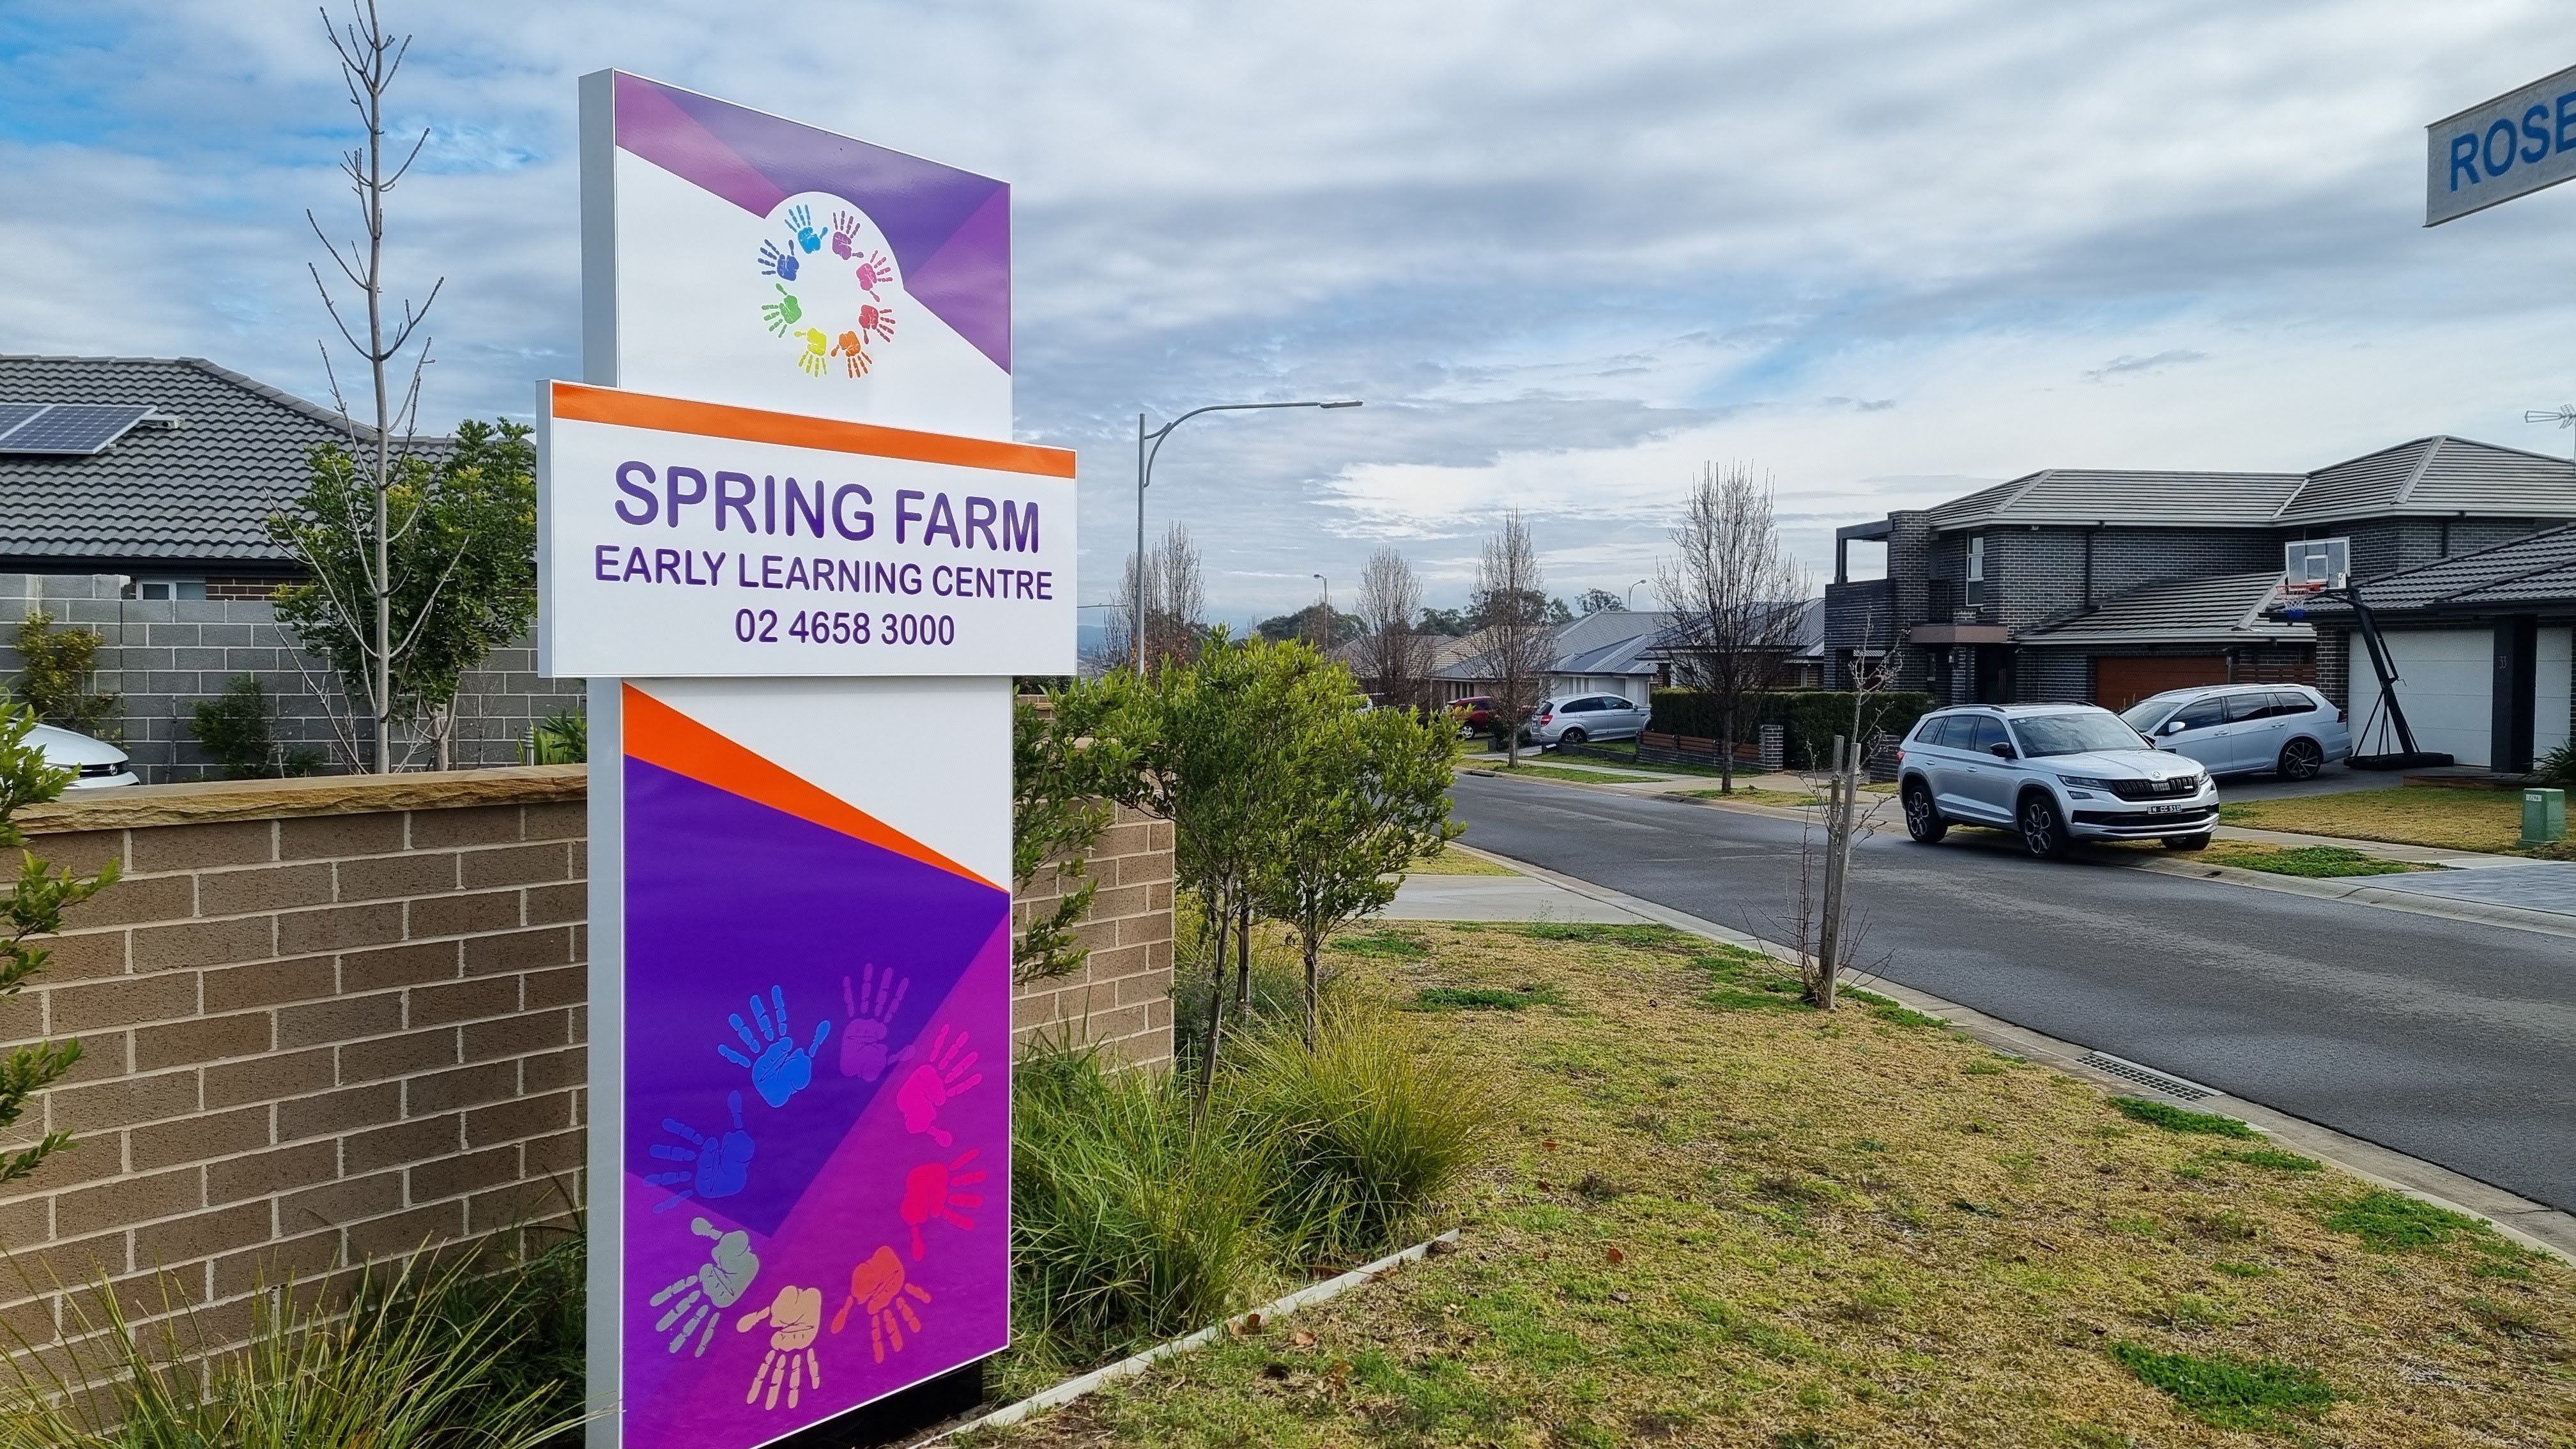 SPRING FARM EARLY LEARNING